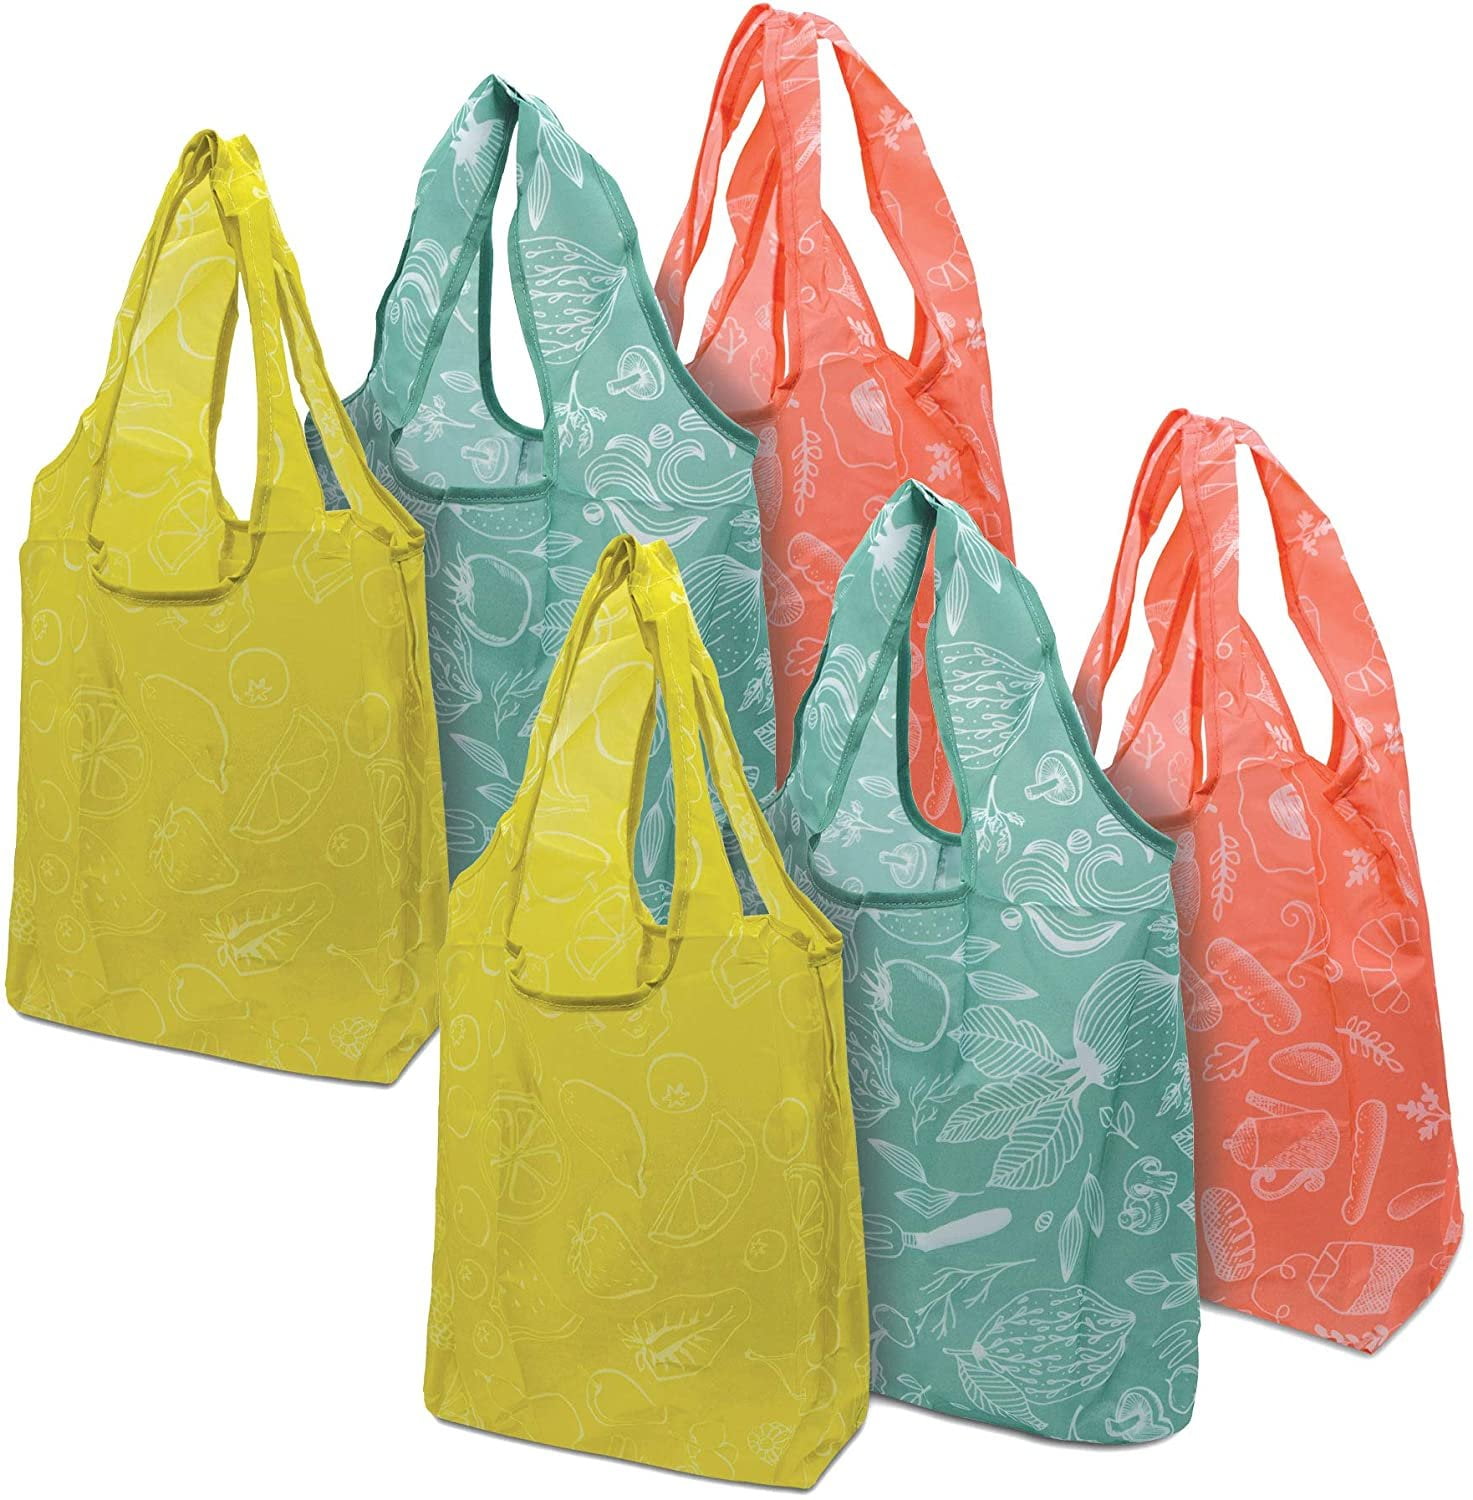 Details about   Leopard Grain Grocery Tote Shopping Bags Portable with Polyester for Travelling 